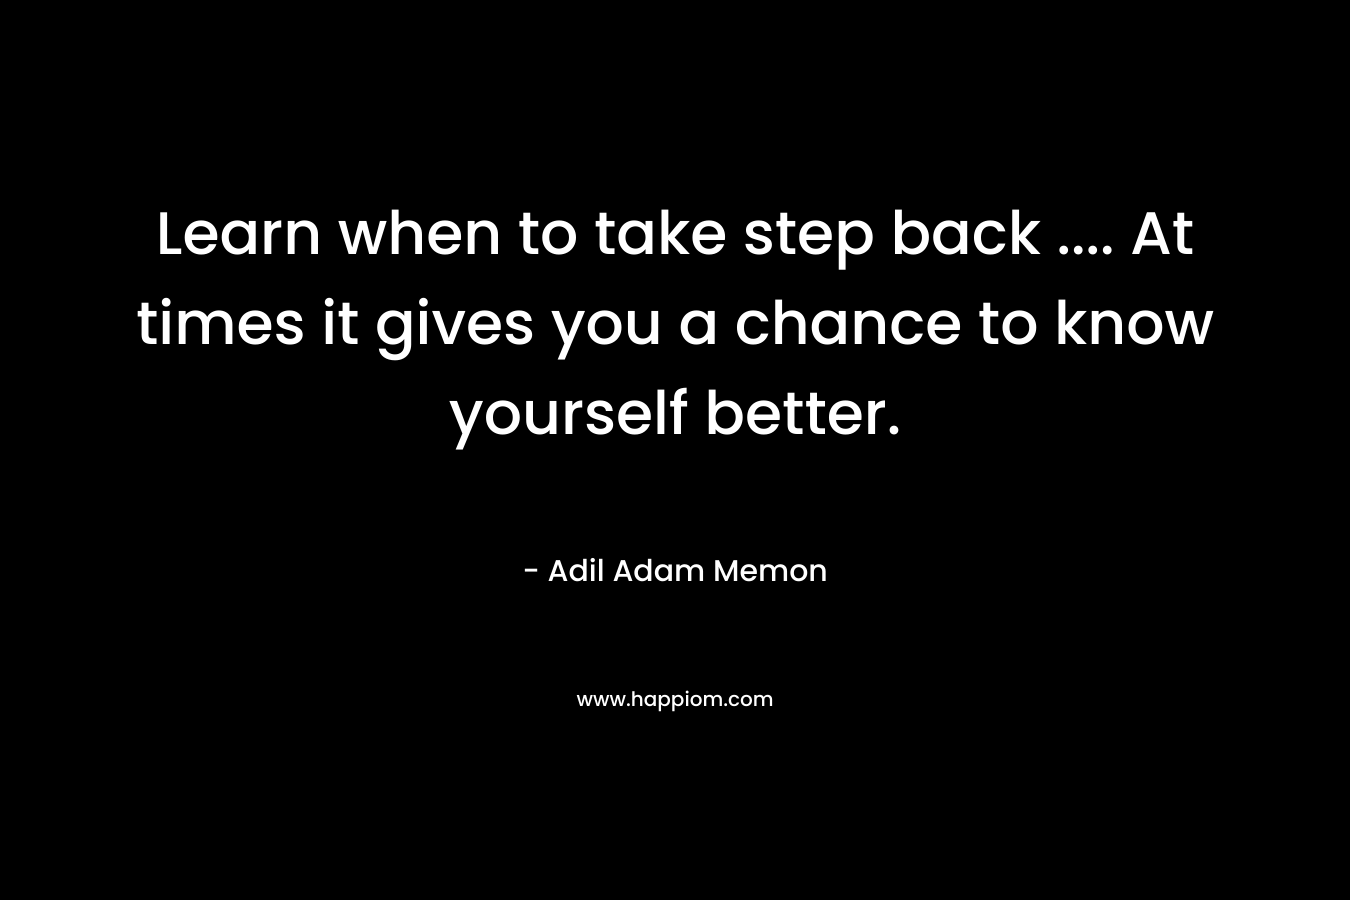 Learn when to take step back .... At times it gives you a chance to know yourself better.